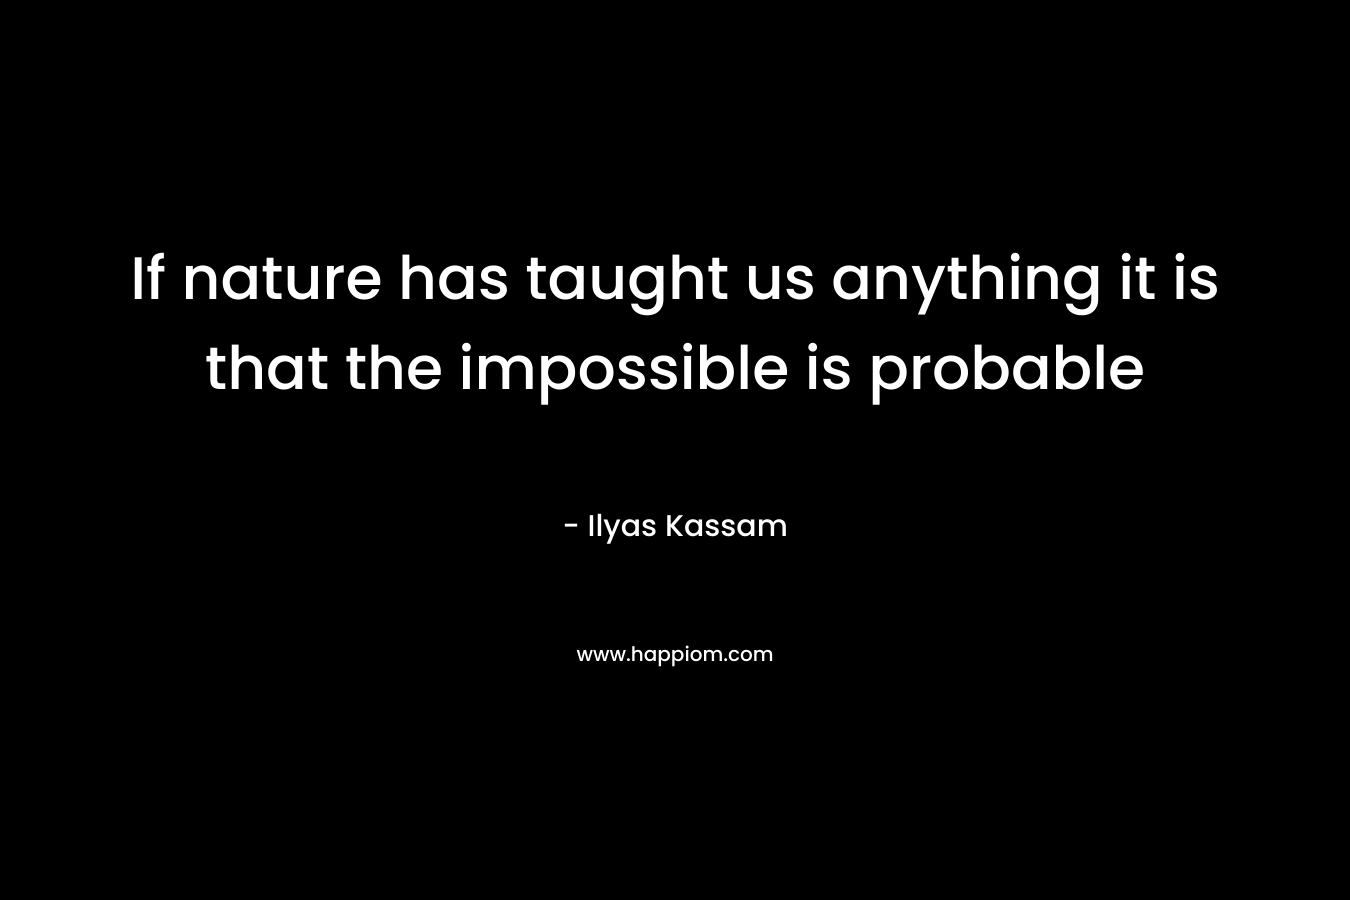 If nature has taught us anything it is that the impossible is probable